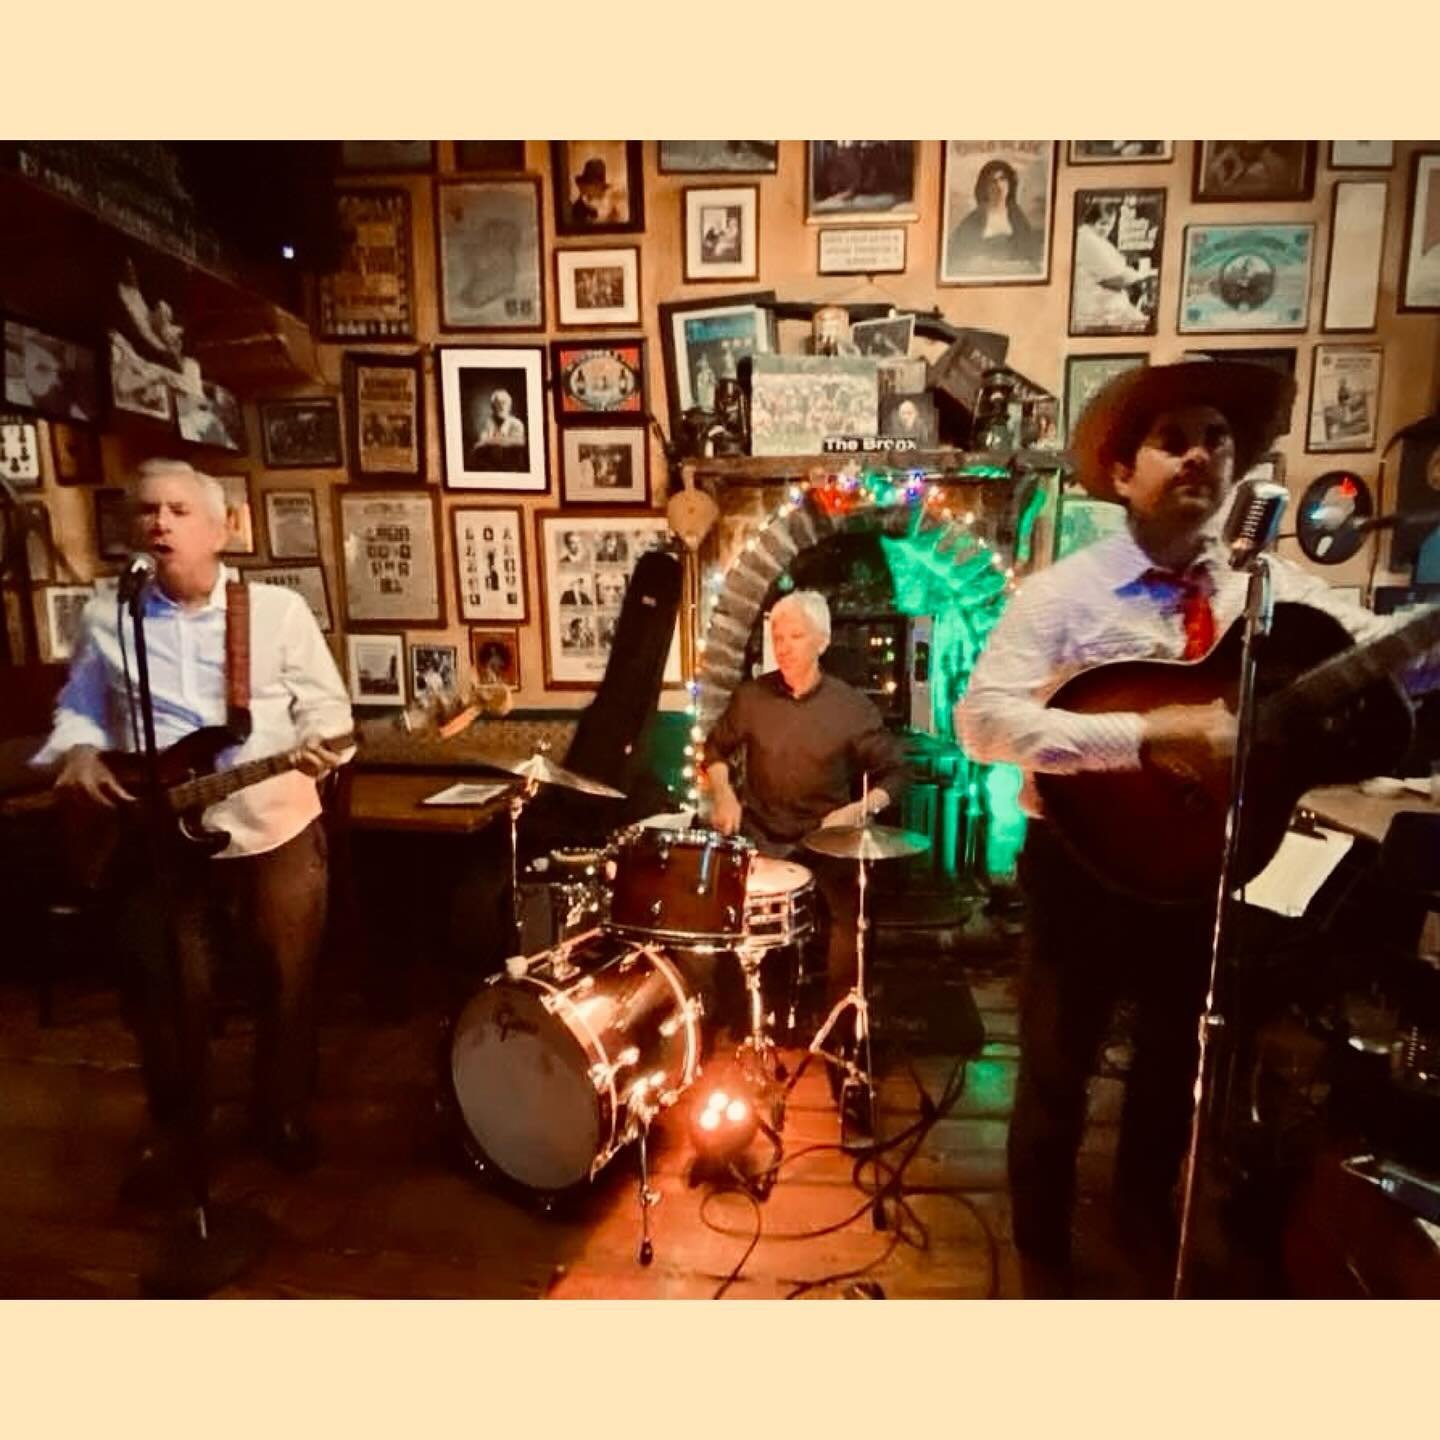 So much to celebrate last night. Thank you all! Live music is on fire @anbealbochtbx 
Give it for the band: bass / backing vocals @steverubenstein and Mark Flynn on drums.